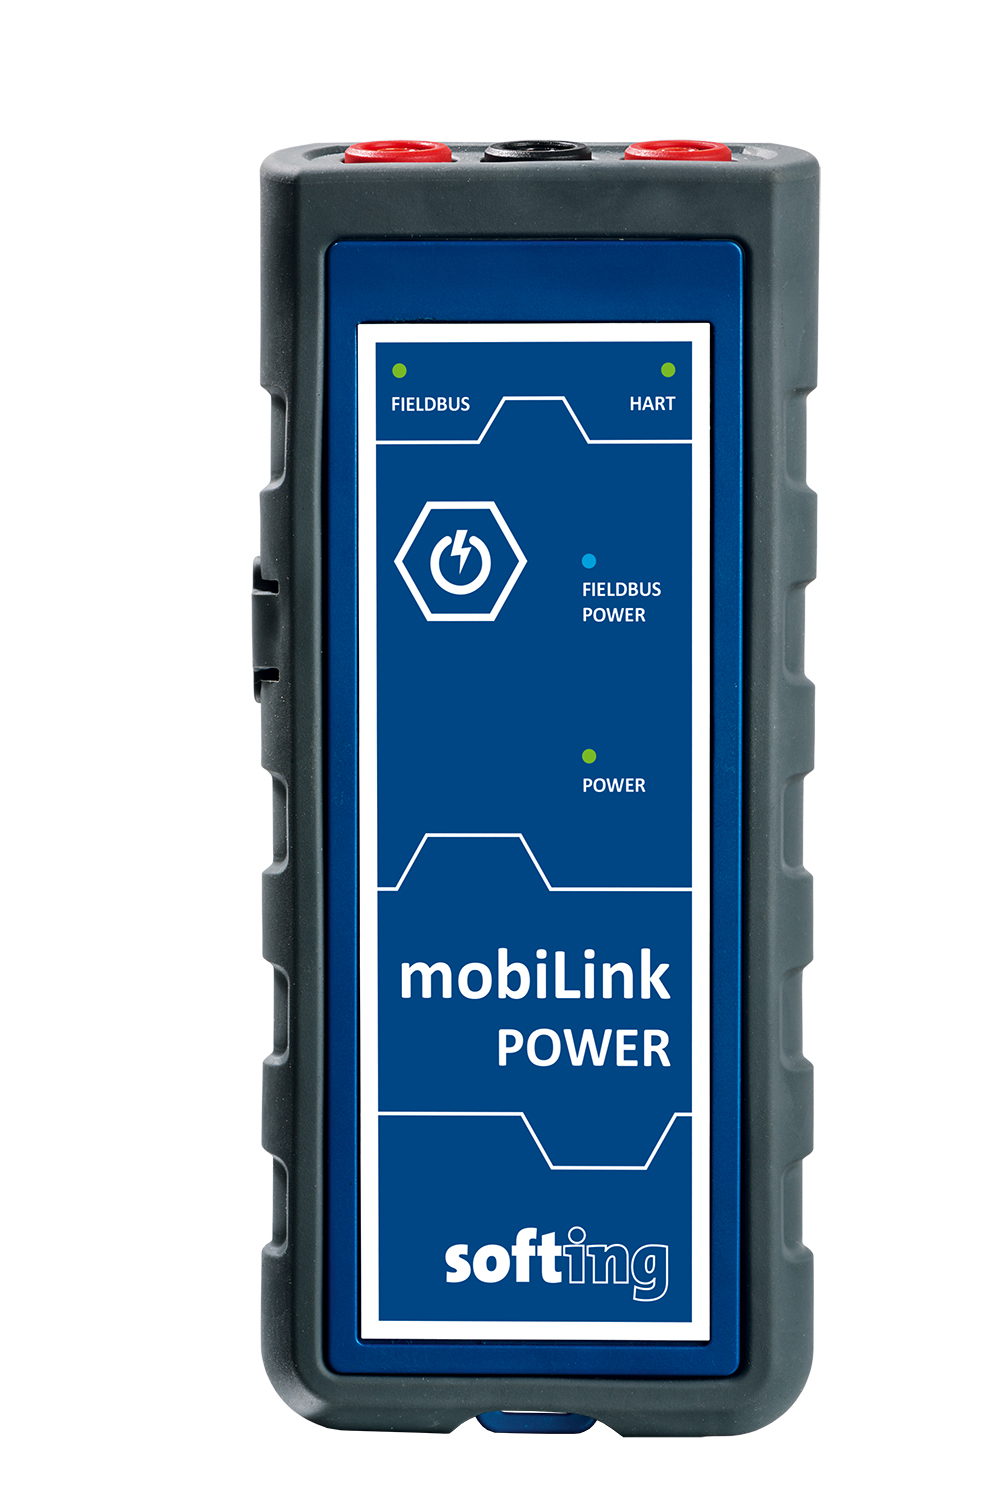 mobiLinkPower